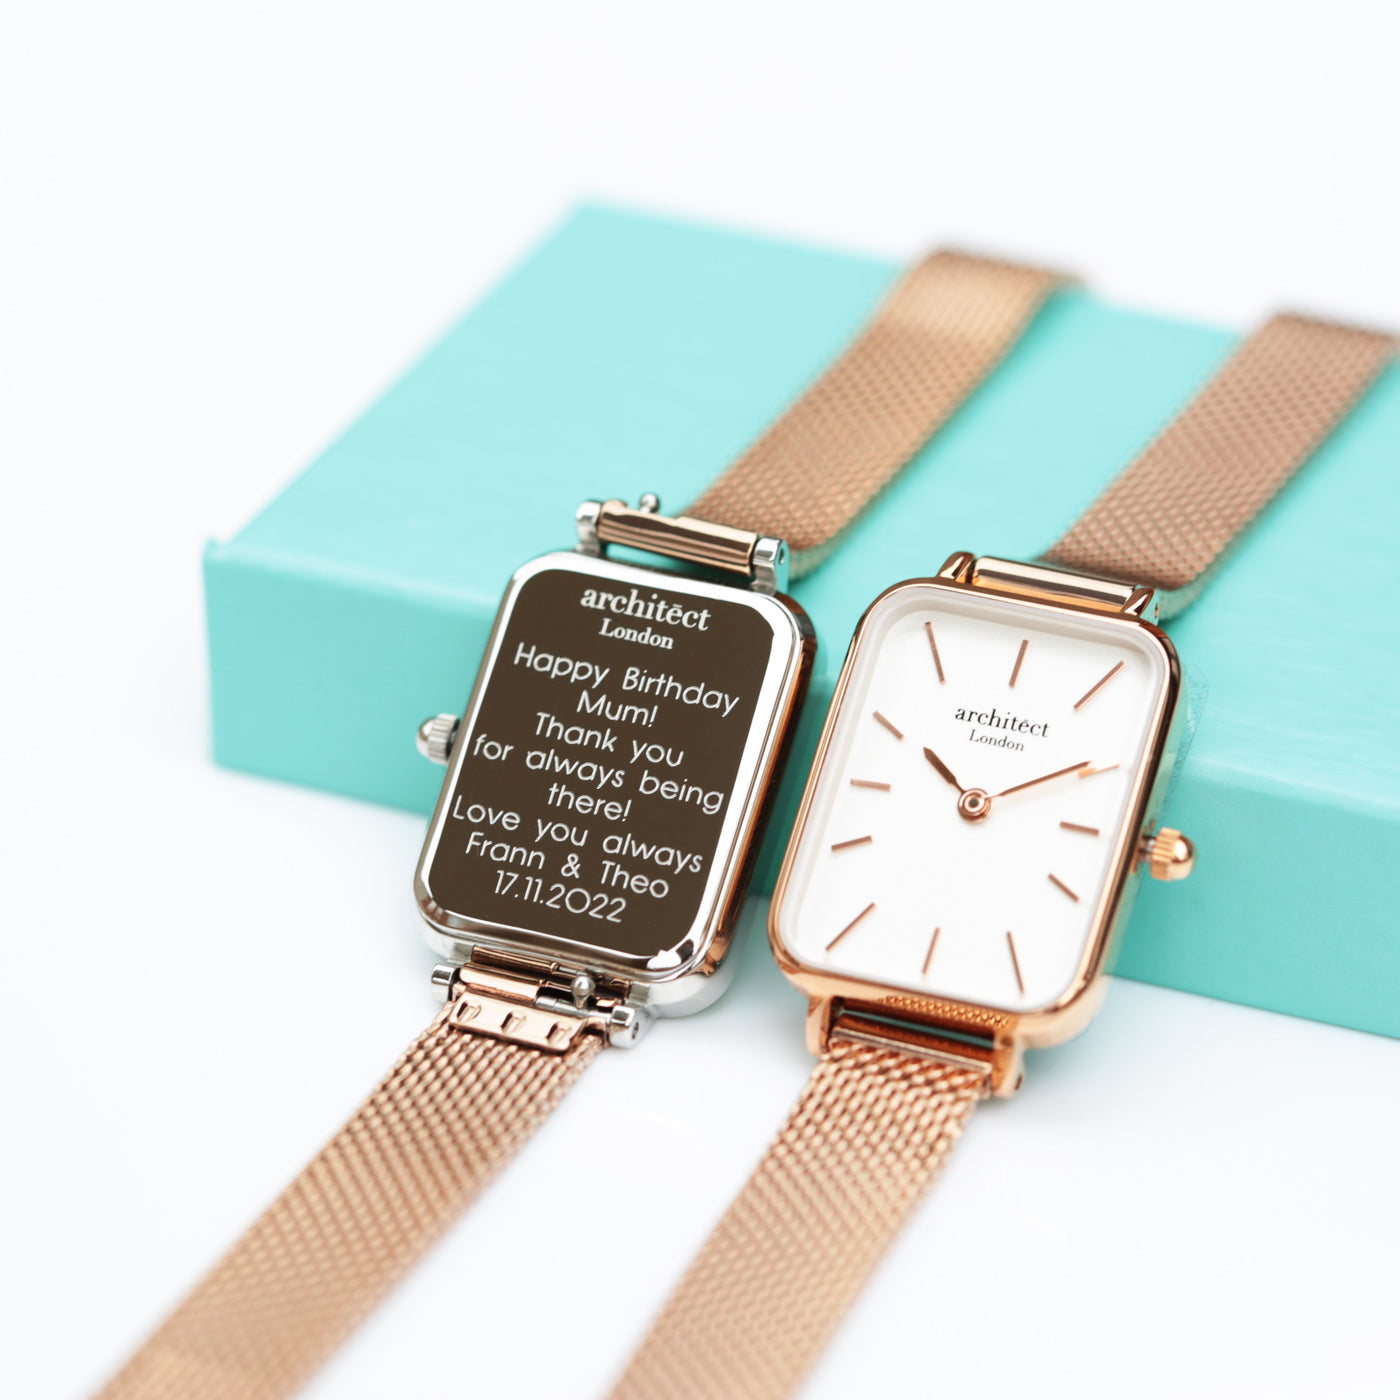 Ladies Architect Lille Watch - Rose Gold - Modern Font Engraving